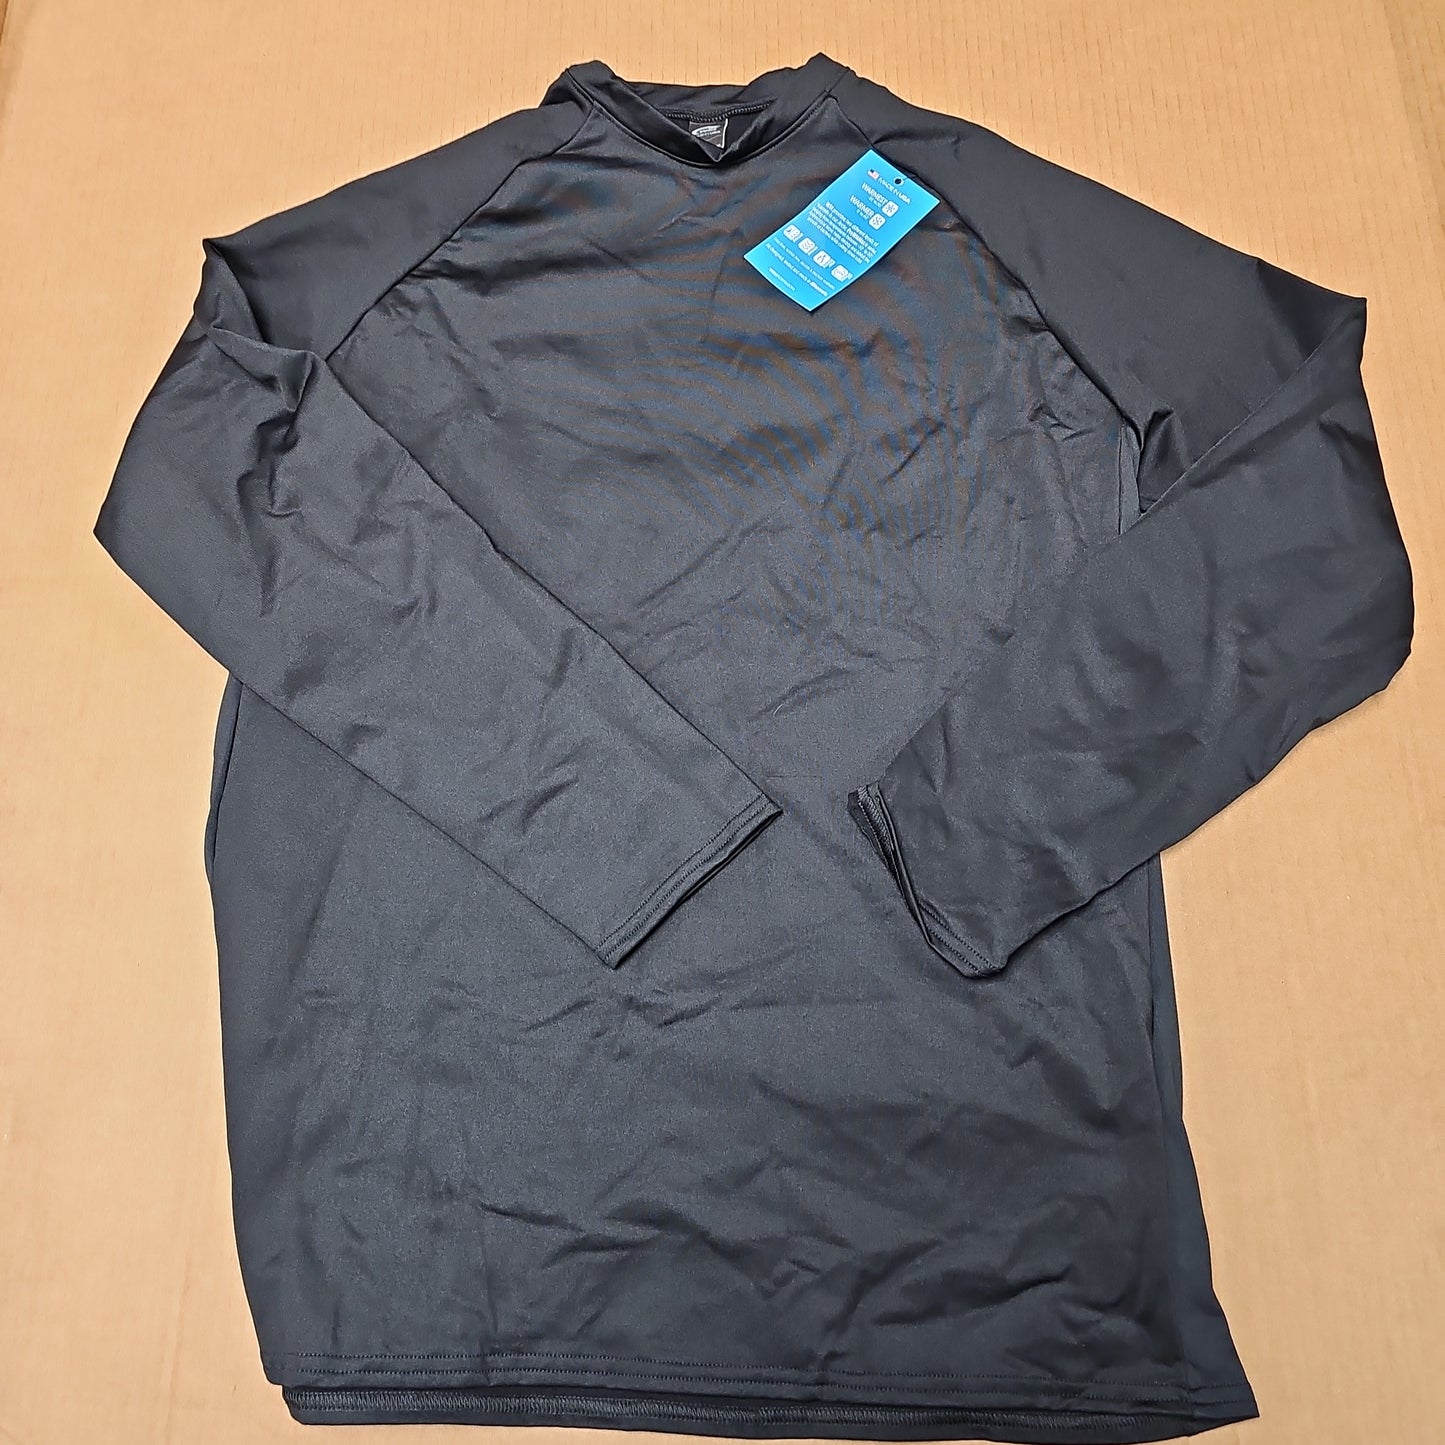 Shirt: L/S ProWikMax Fitted Crew, Black/Black, XX-Large 663CLW-XXL